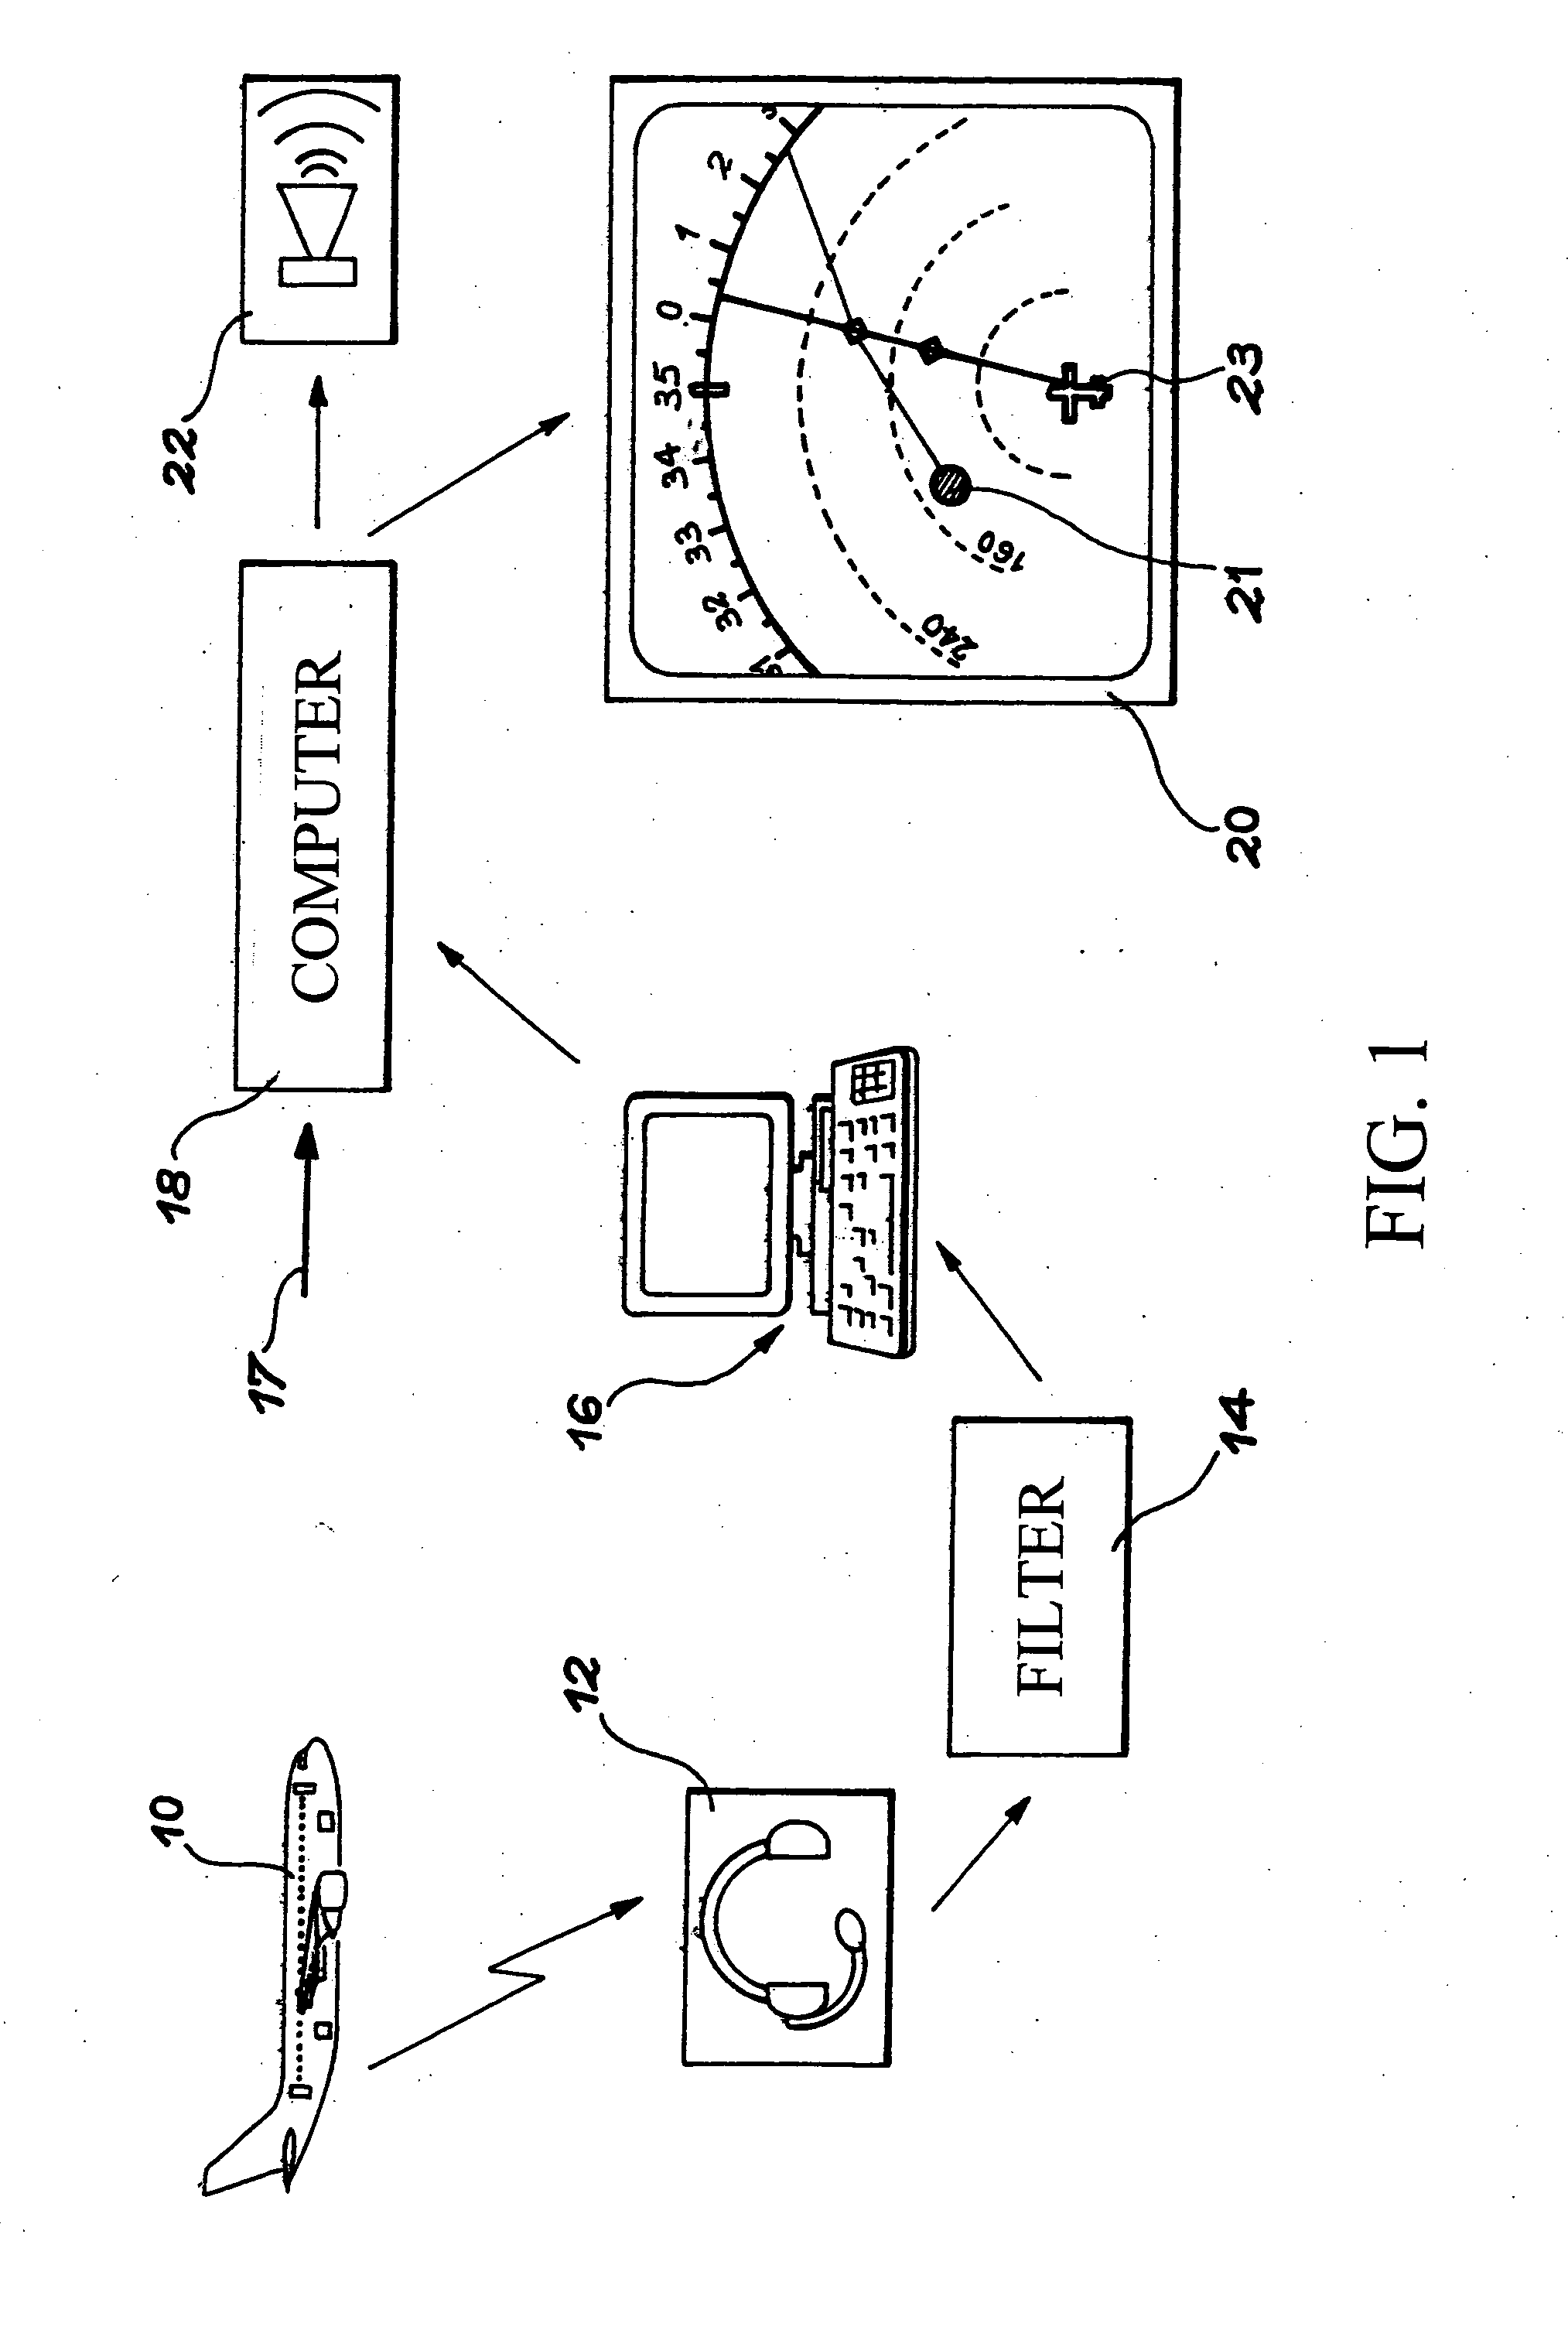 Method and on board device for providing pilot assistance in the lack of air control